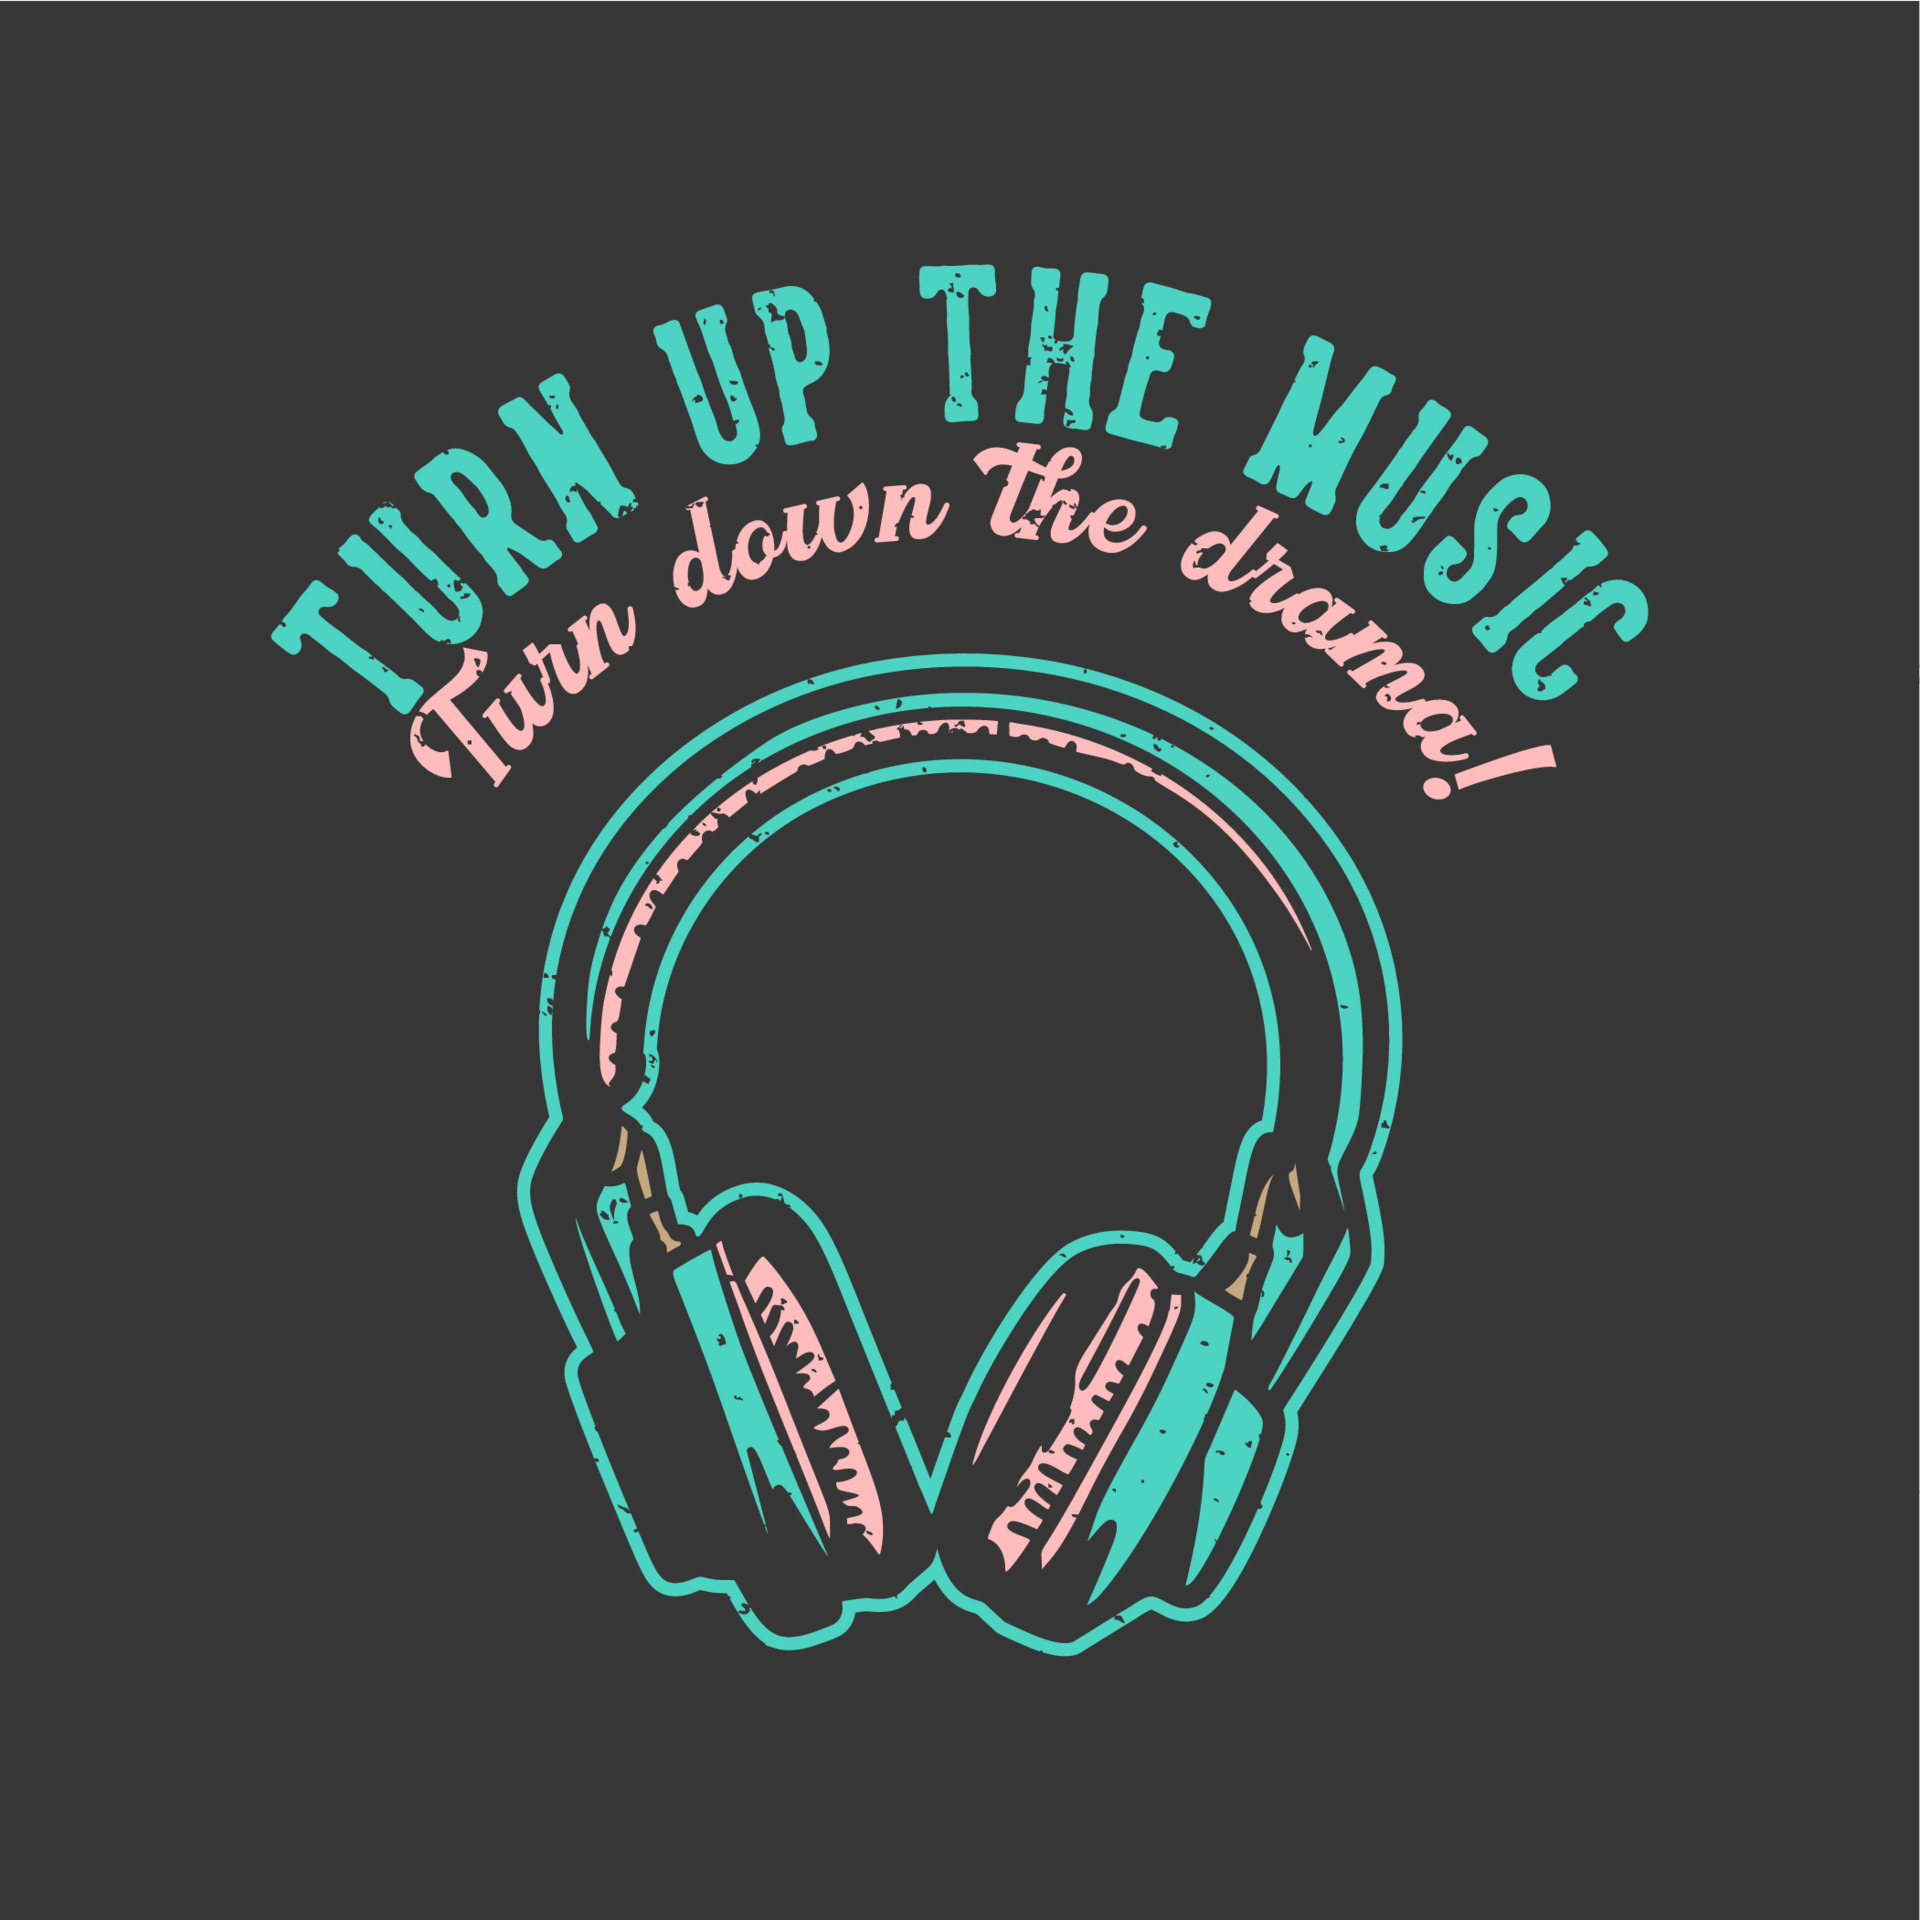 T Shirt Design Slogan Typography Turn Up The Music Turn Down The Drama With Headphone Vintage Illustration